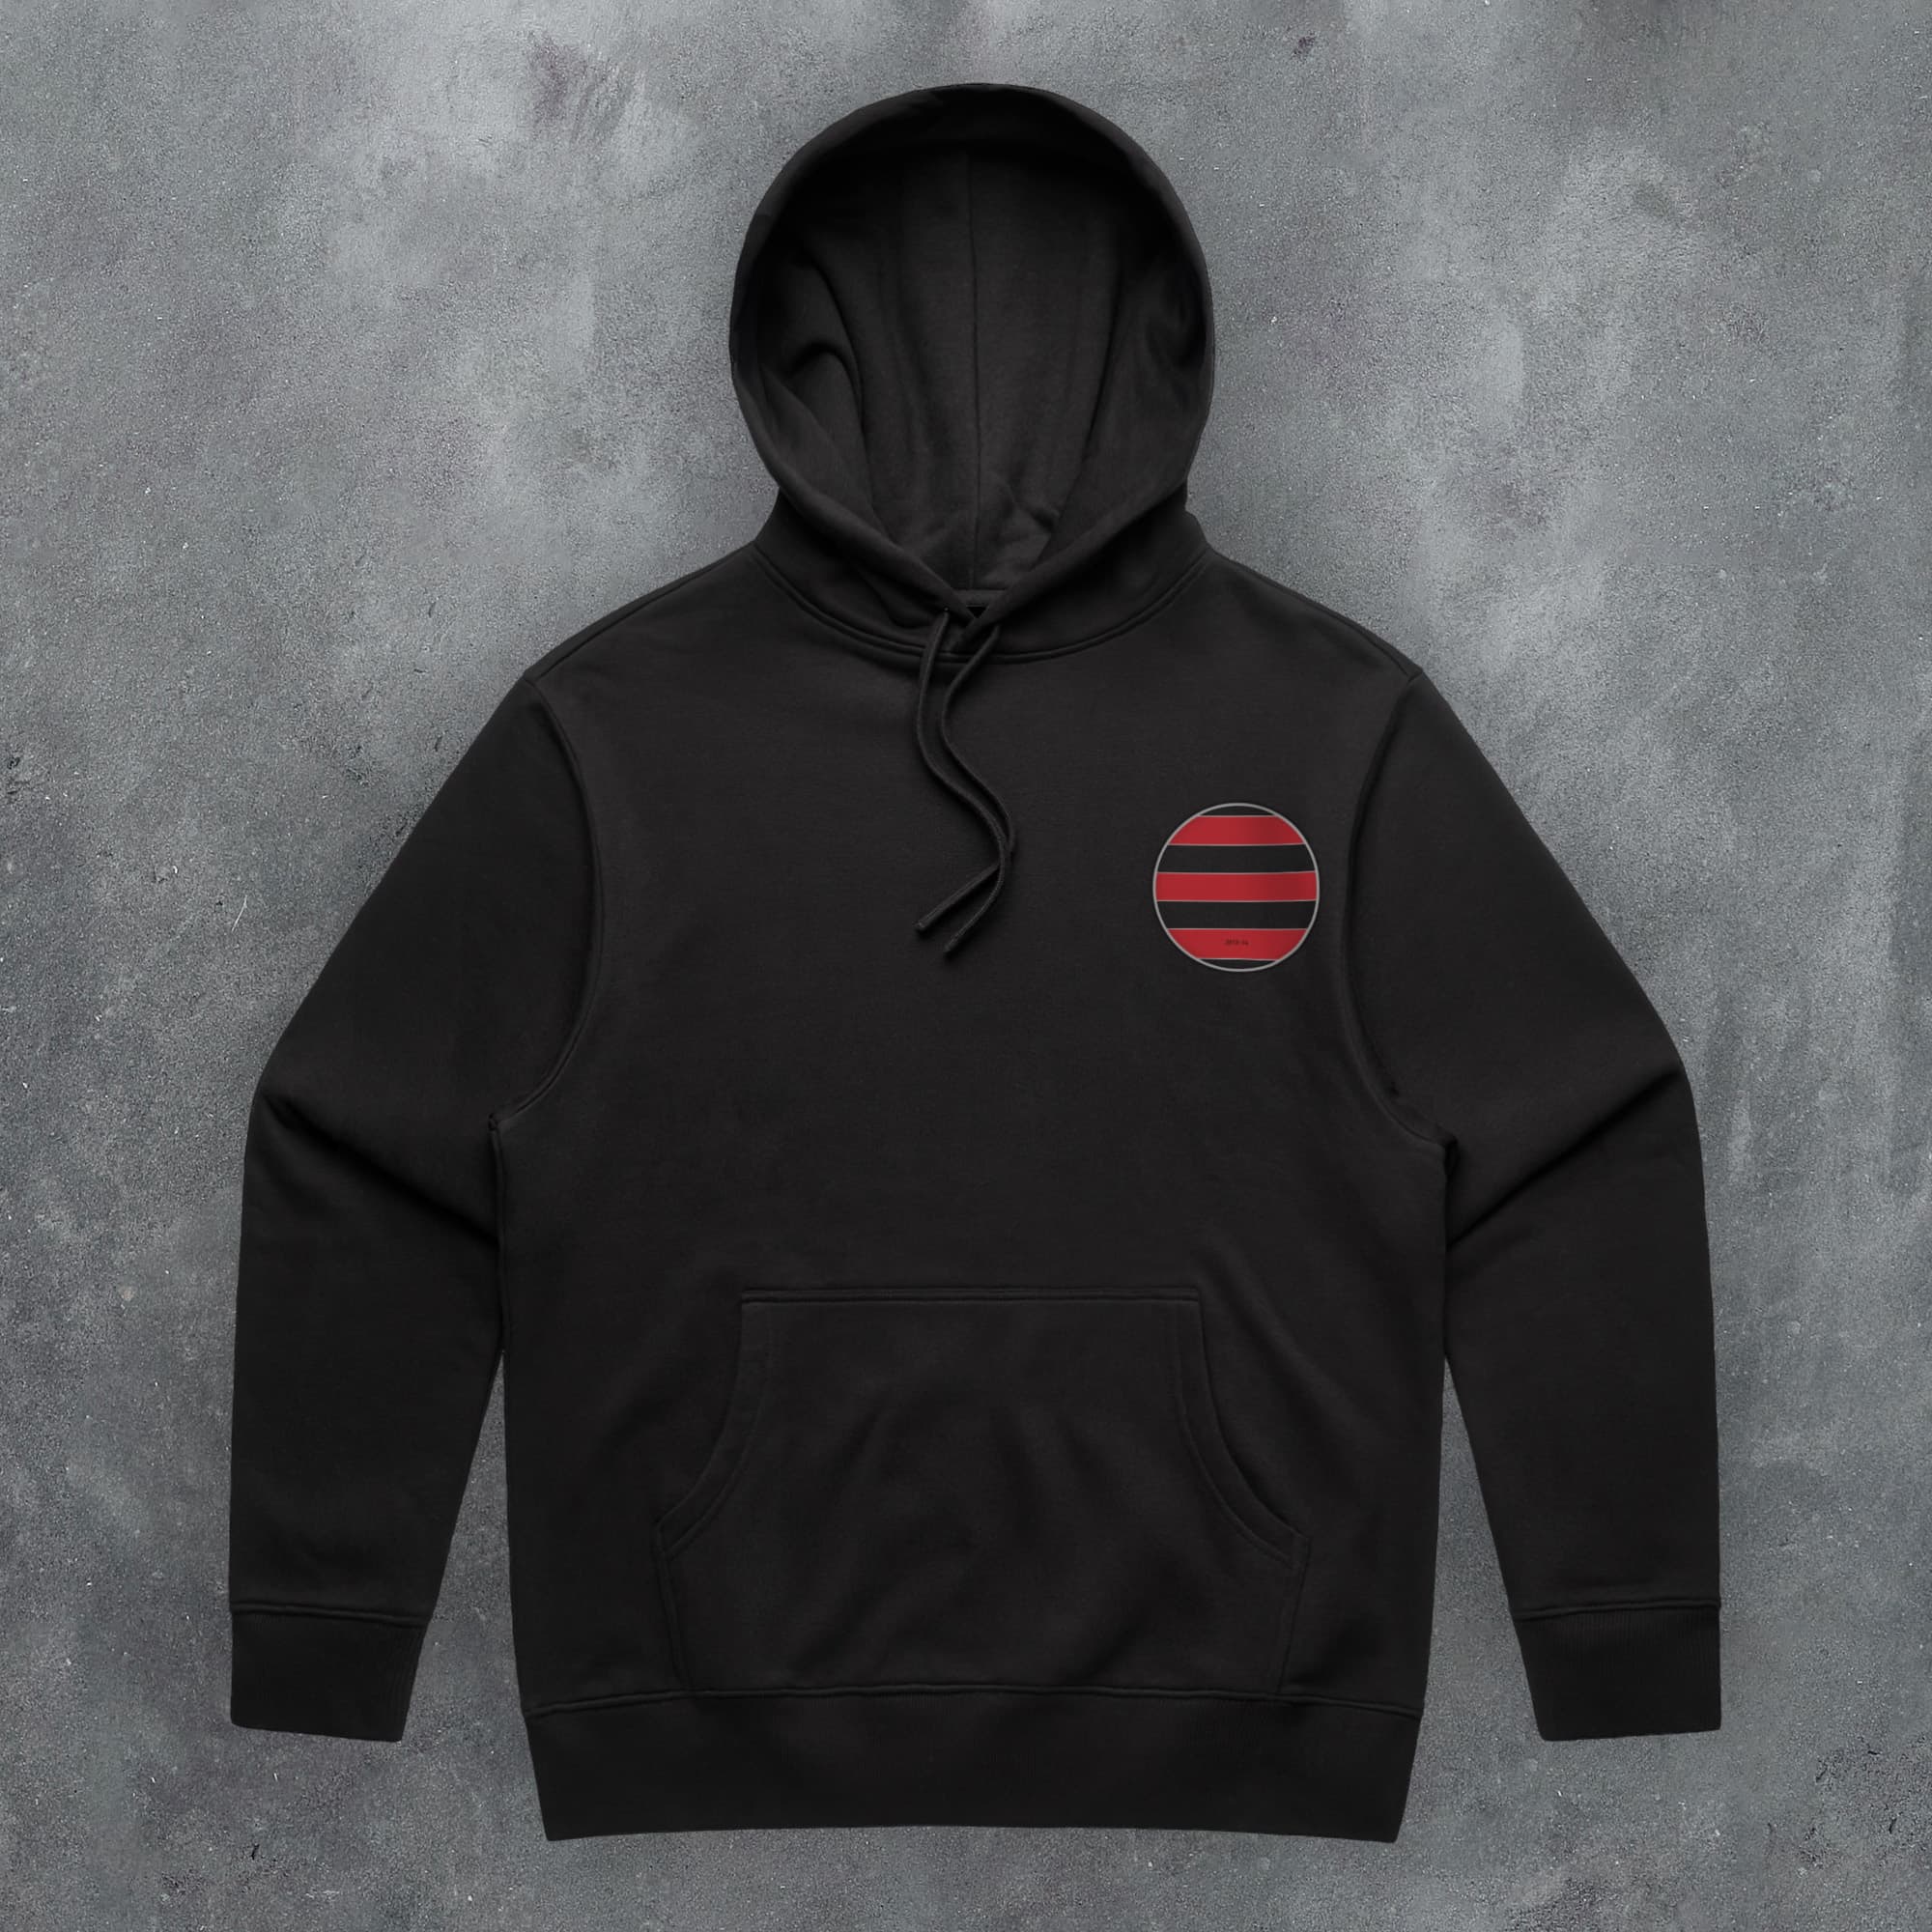 a black hoodie with a red and black stripe on it